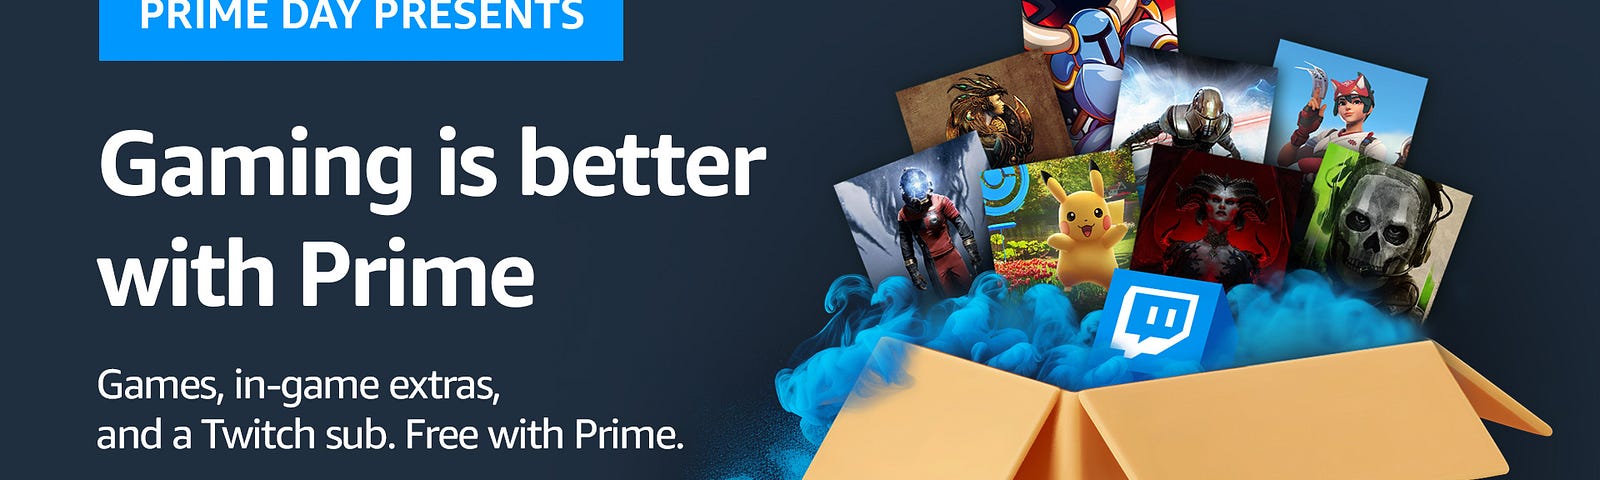 Snuggle Up with Prime Gaming's Free Games and In-Game Content this